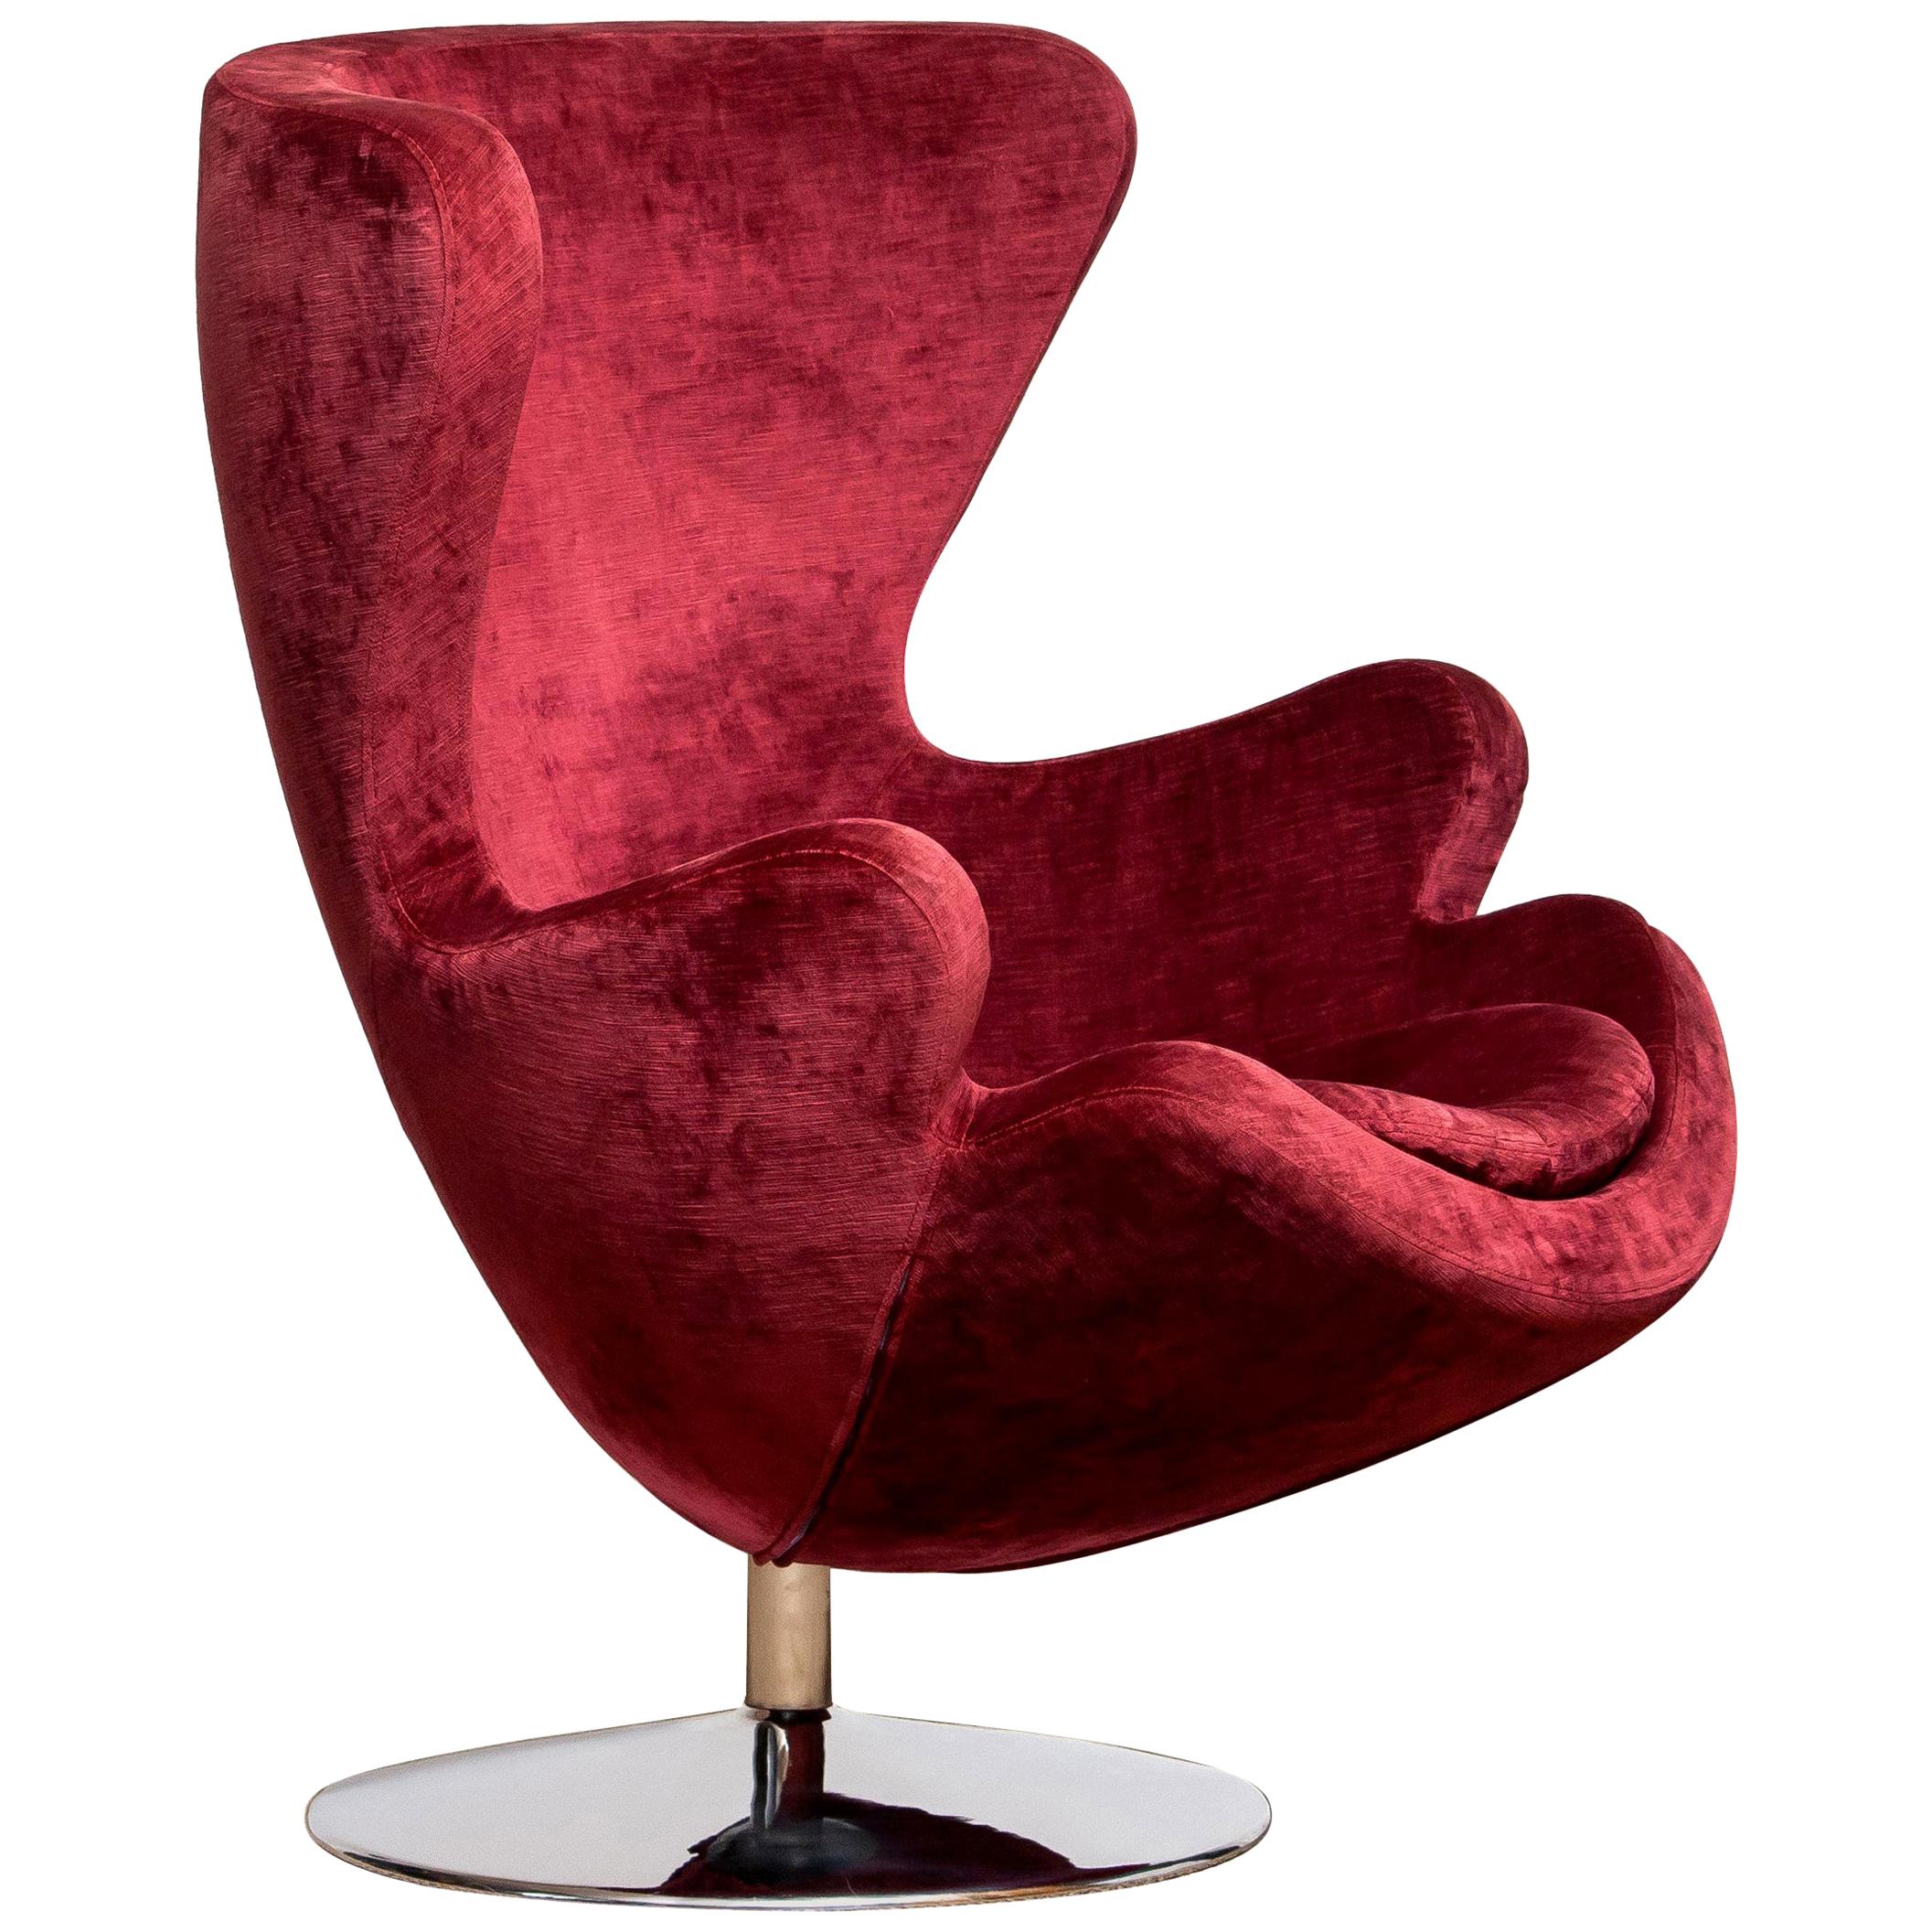 Mid-Century Modern 1970s, Swivel Lounge Egg Chair on Chrome Stand Colored in Bordeaux Red Baby Roy